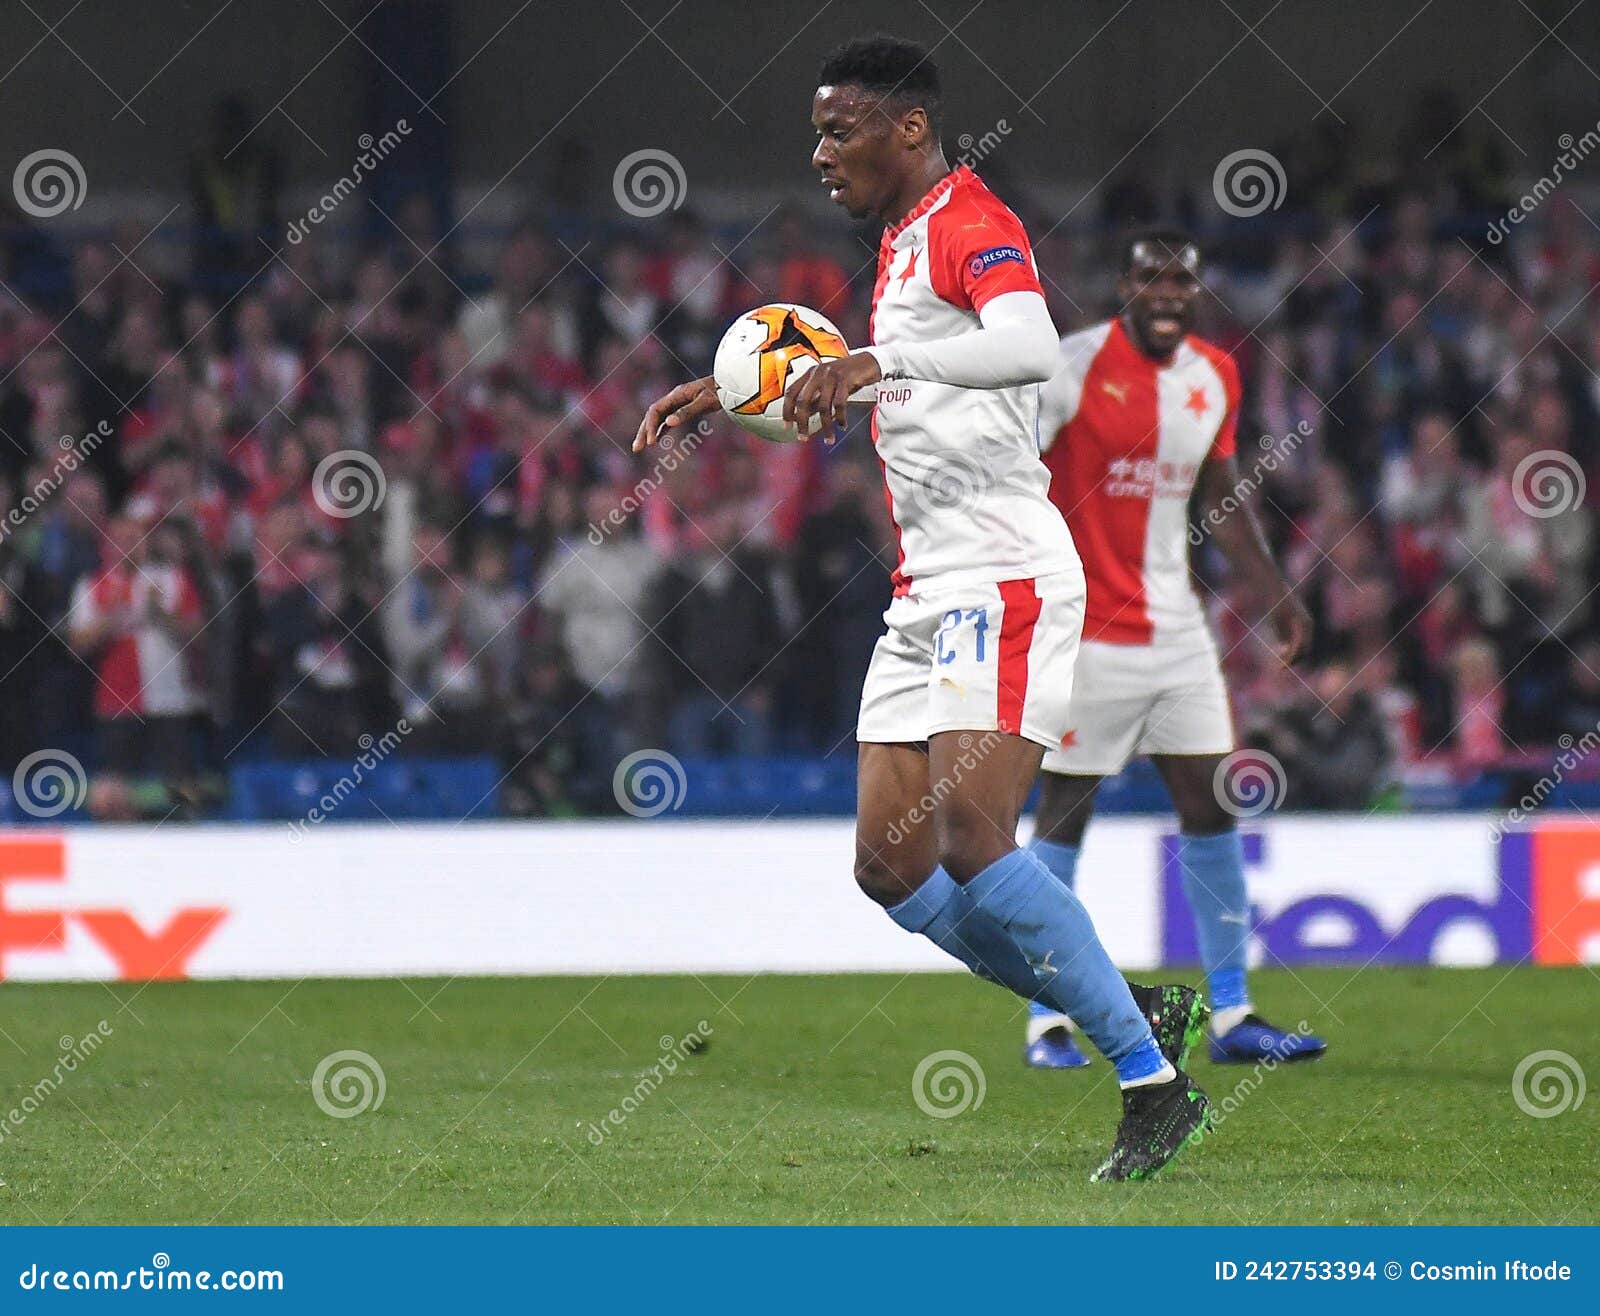 Milan, Italy. 17 September, 2019: Ibrahim Traore of SK Slavia Praha in  action during the UEFA Champions League football match between FC  Internazionale and SK Slavia Praha. The match ended in a